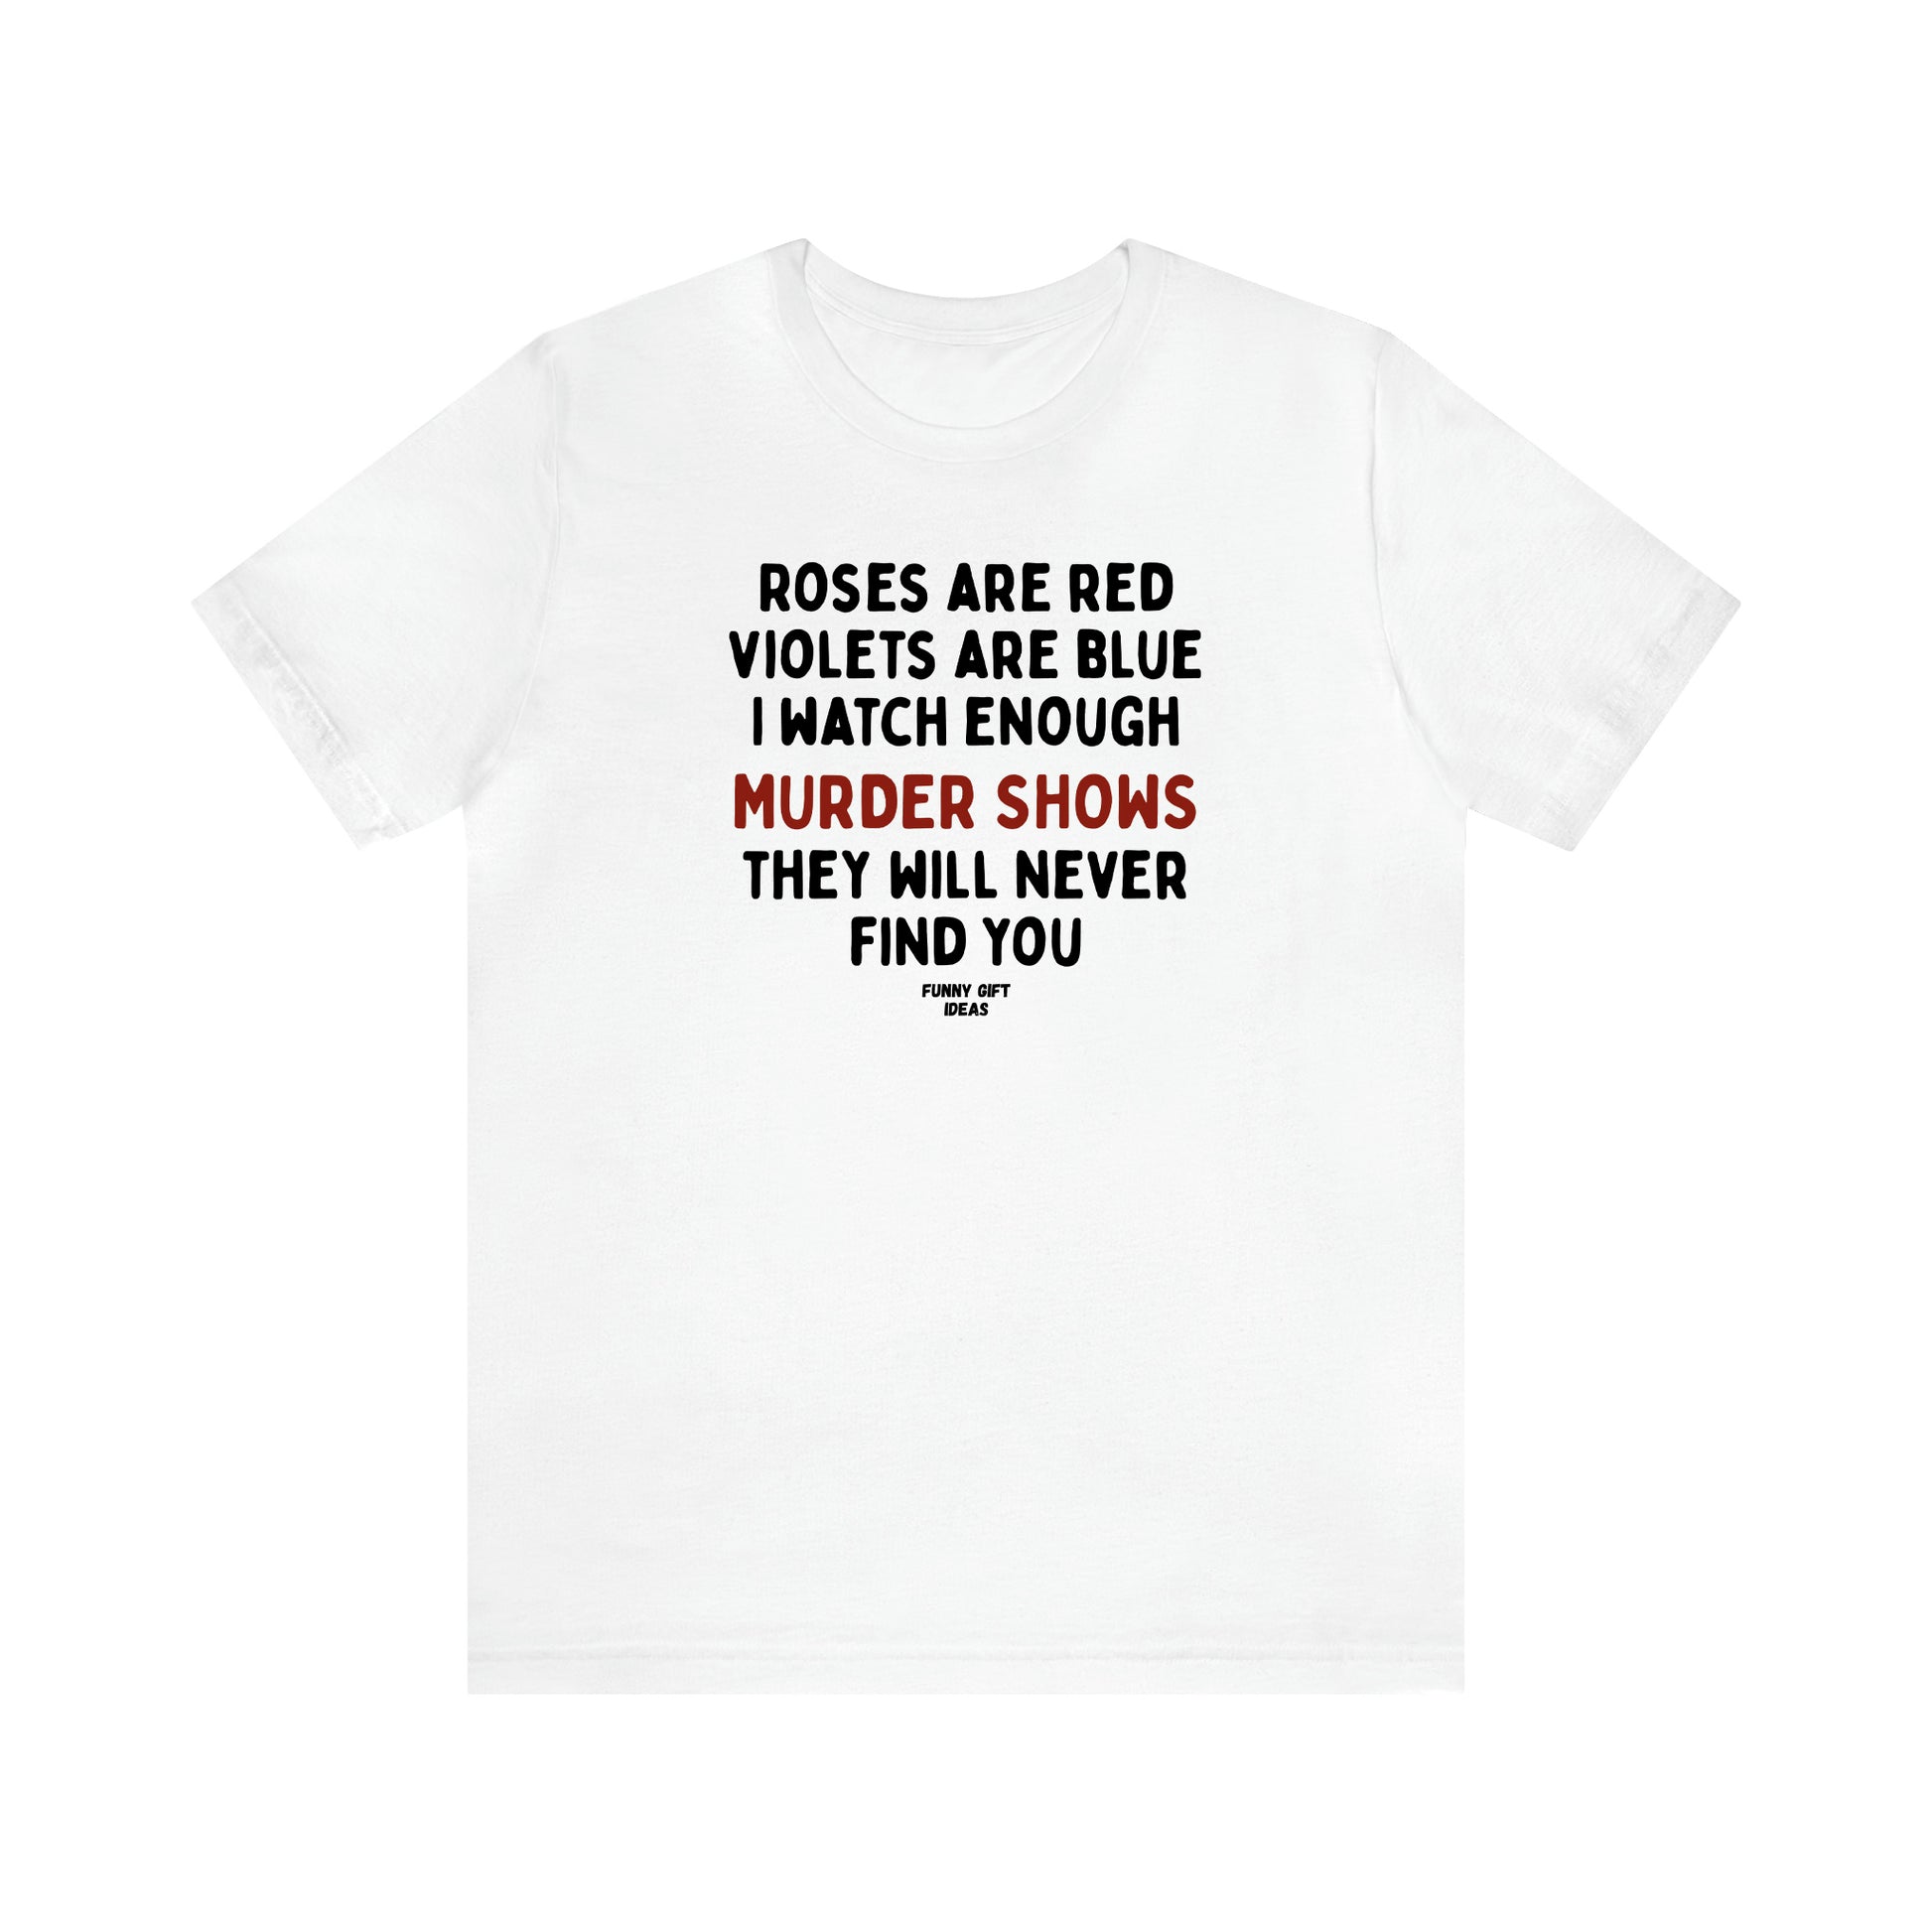 Women's T Shirts Roses Are Red Violets Are Blue I Watch Enough Murder Shows They Will Never Find You - Funny Gift Ideas